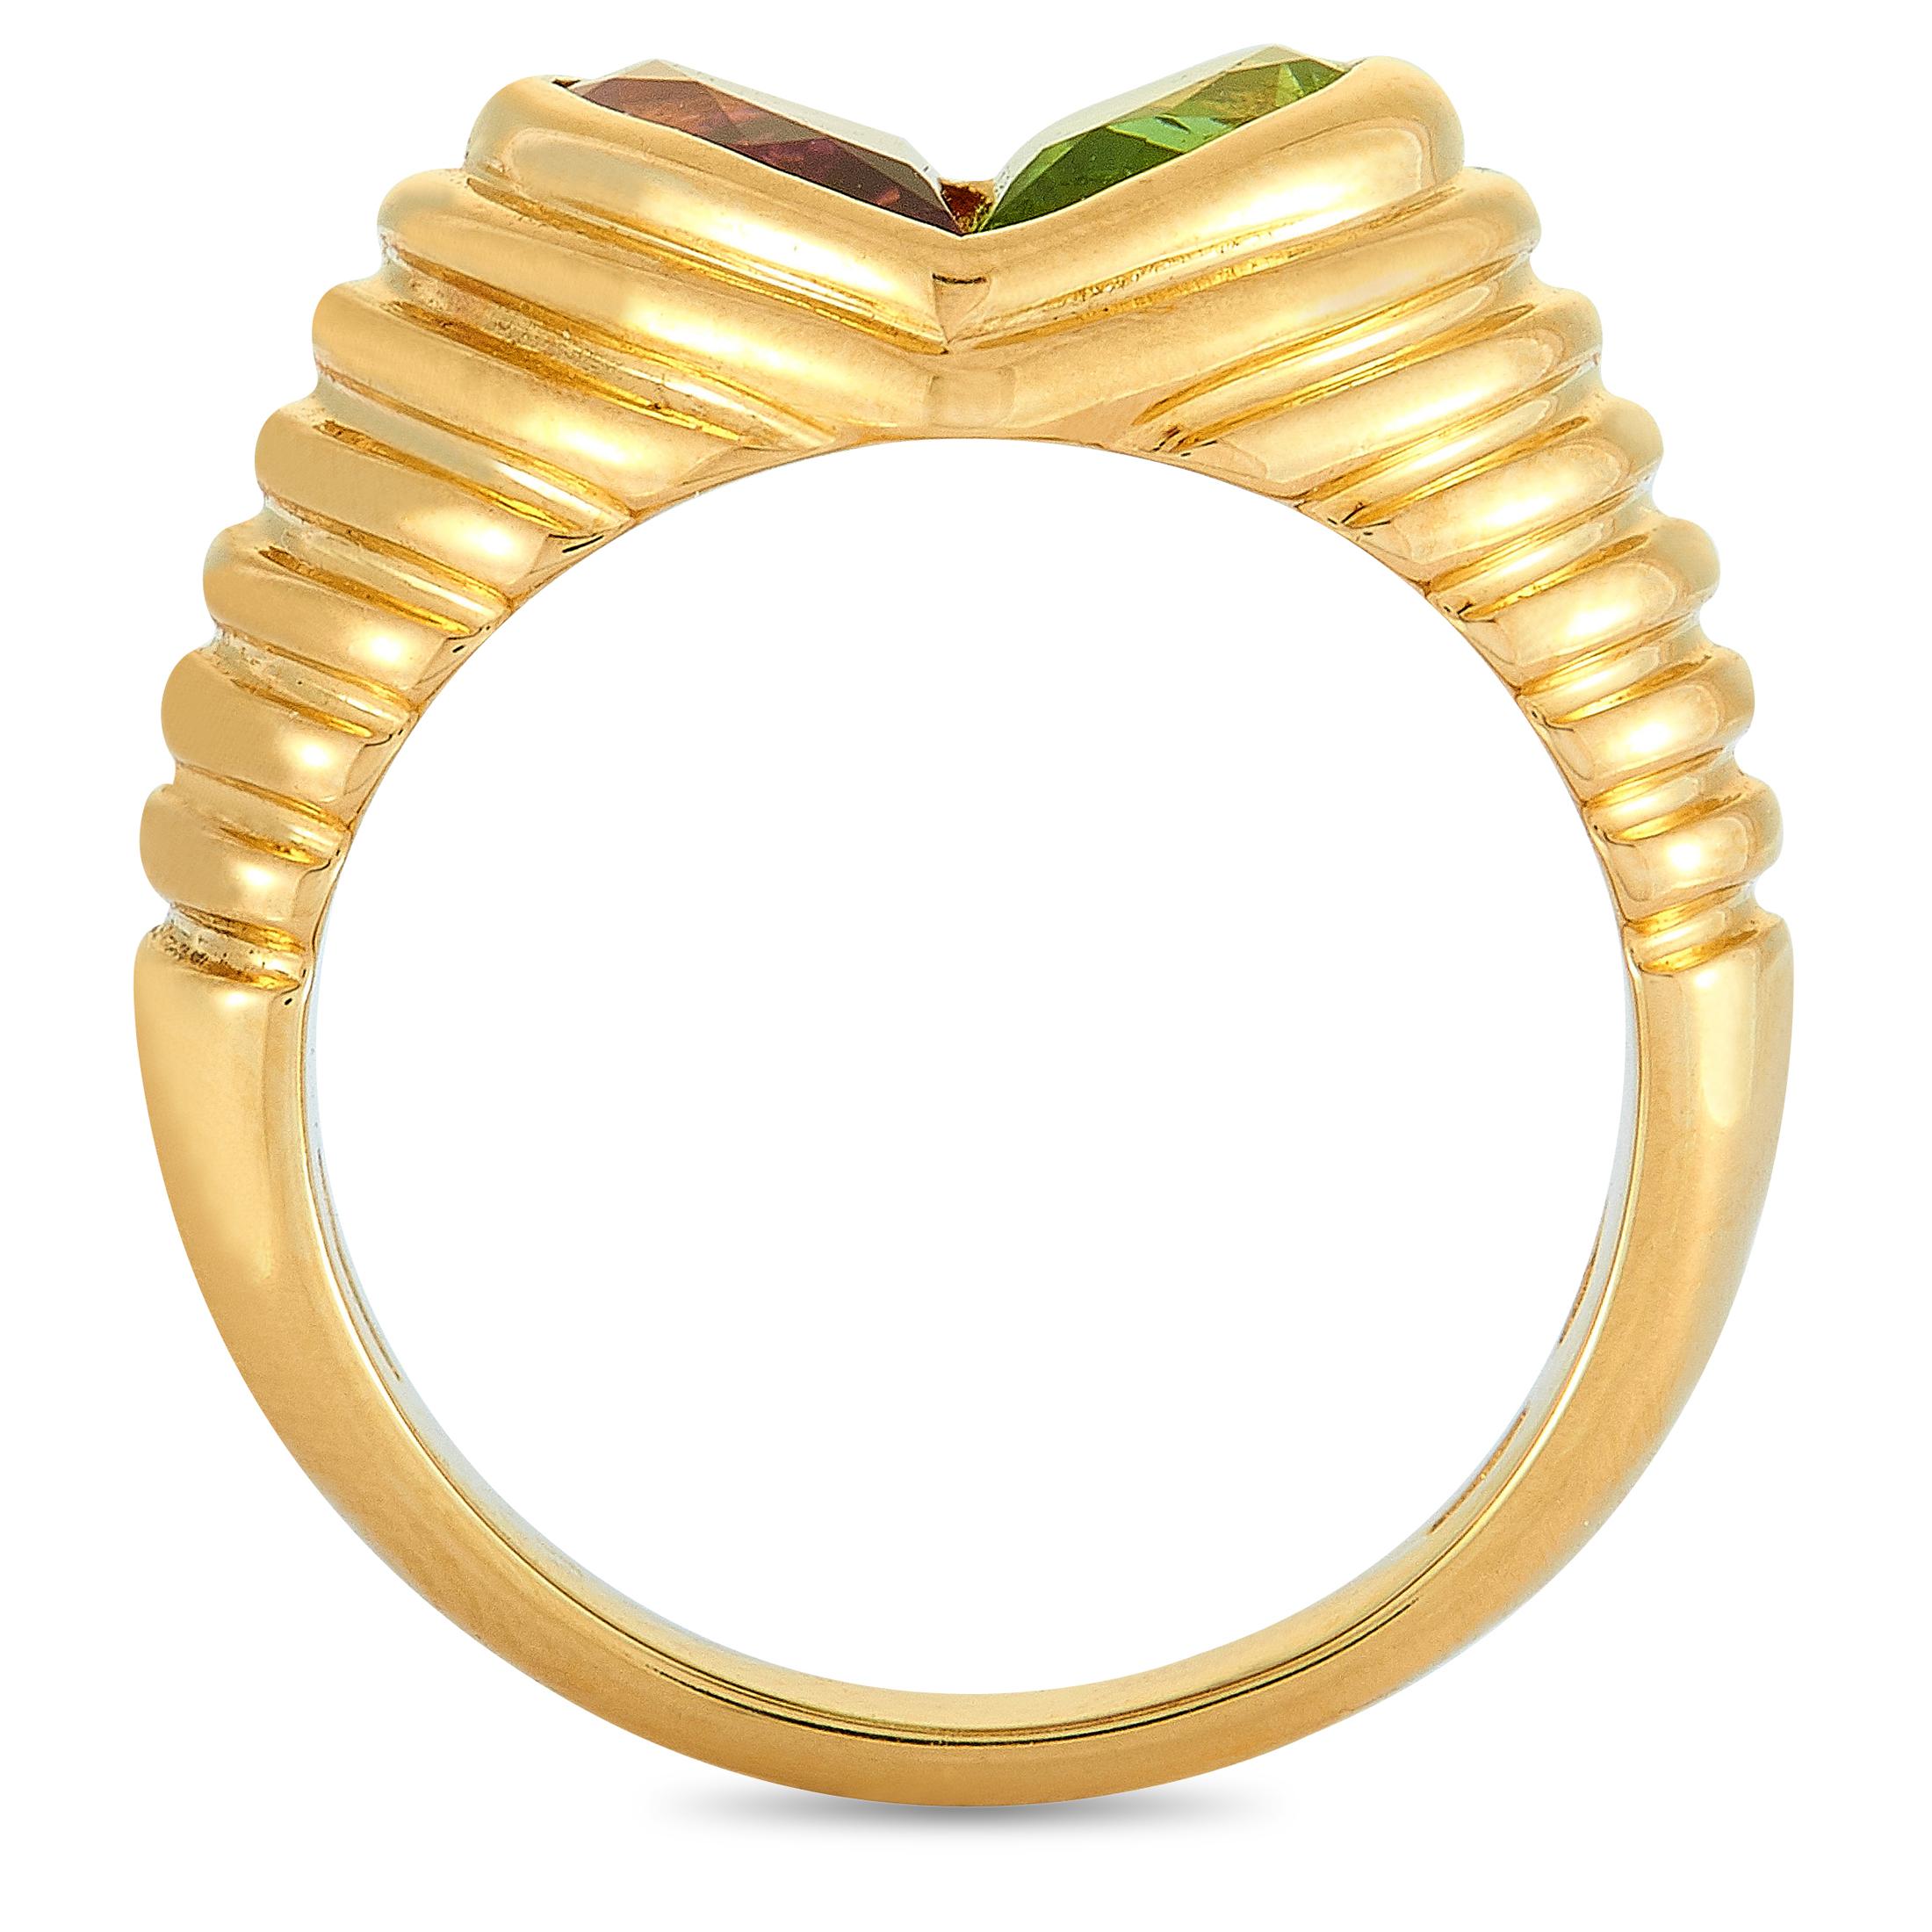 The Bvlgari “Doppio” ring is crafted from 18K yellow gold and set with a peridot and a tourmaline. The ring weighs 10.1 grams, boasting band thickness of 3 mm and top height of 5 mm, while top dimensions measure 10 by 11 mm.
